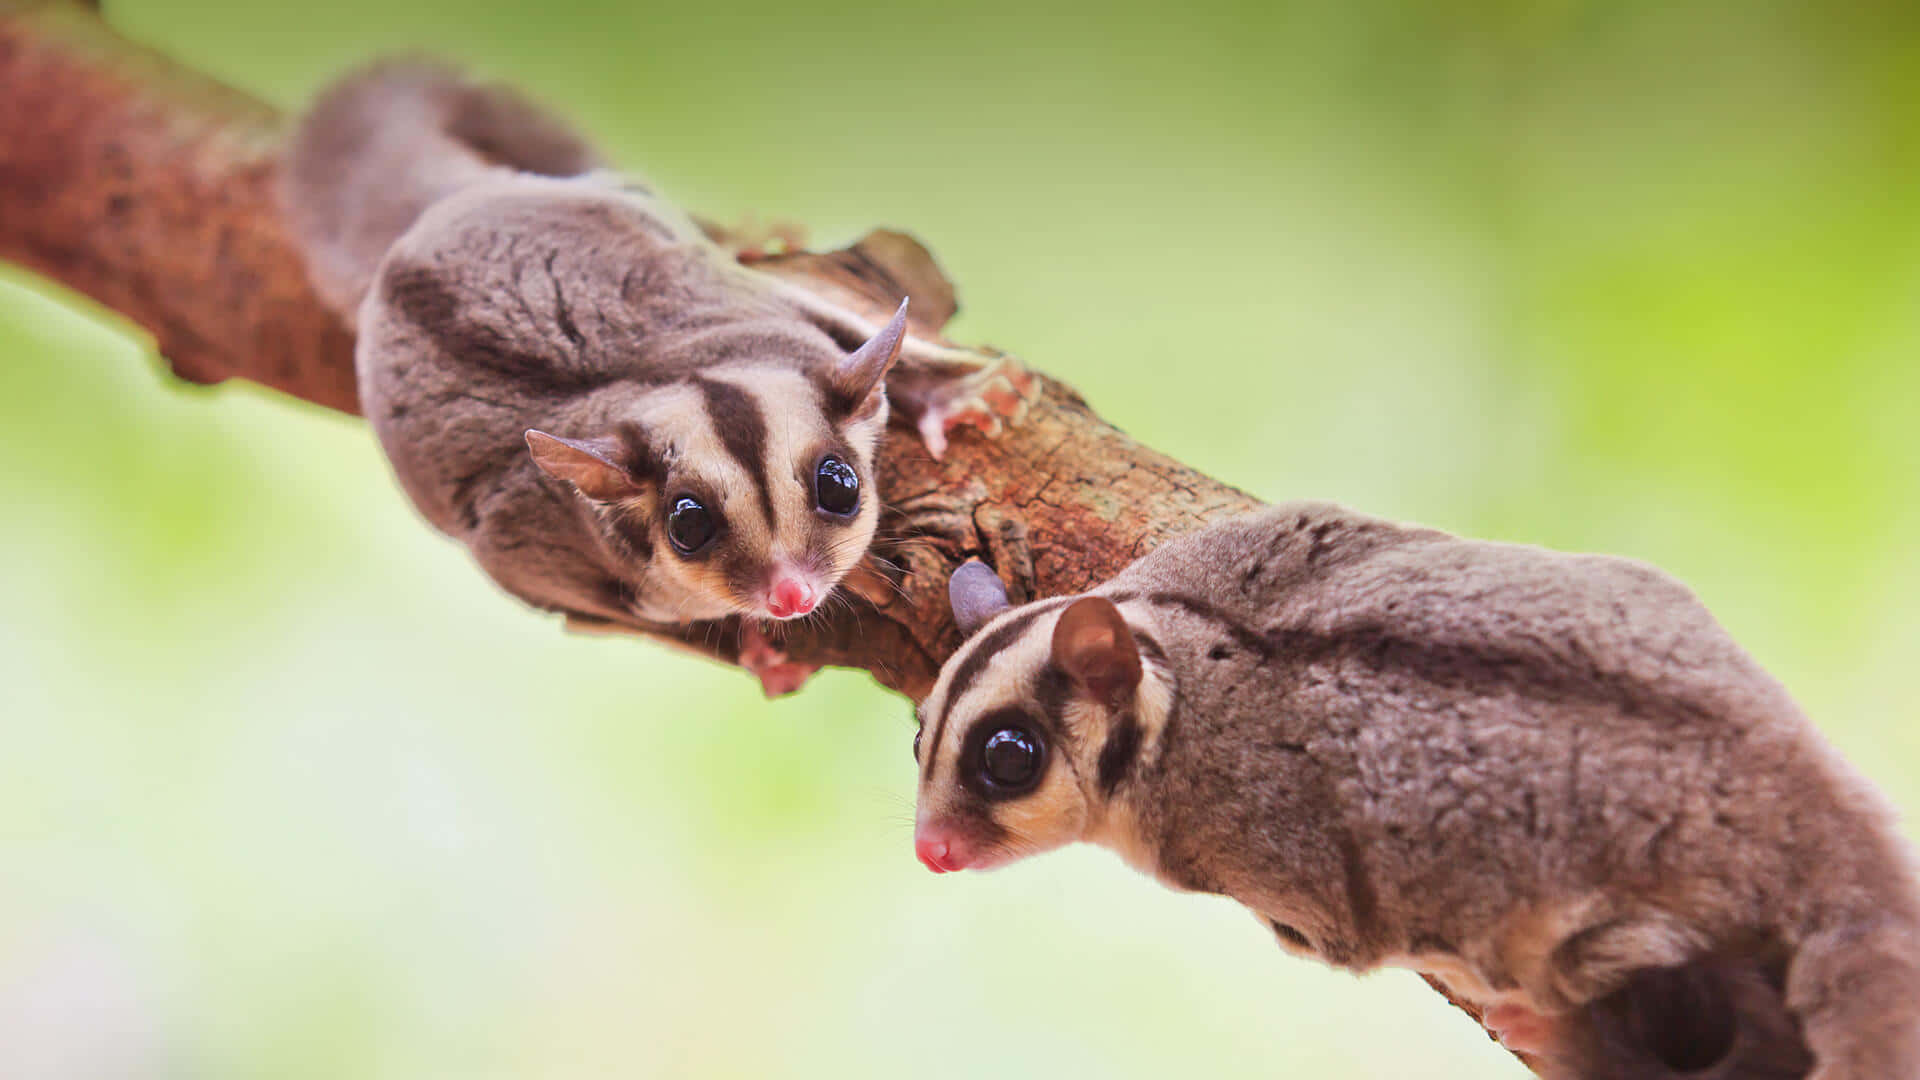 Sugar Glider perched in a tree at sunset.